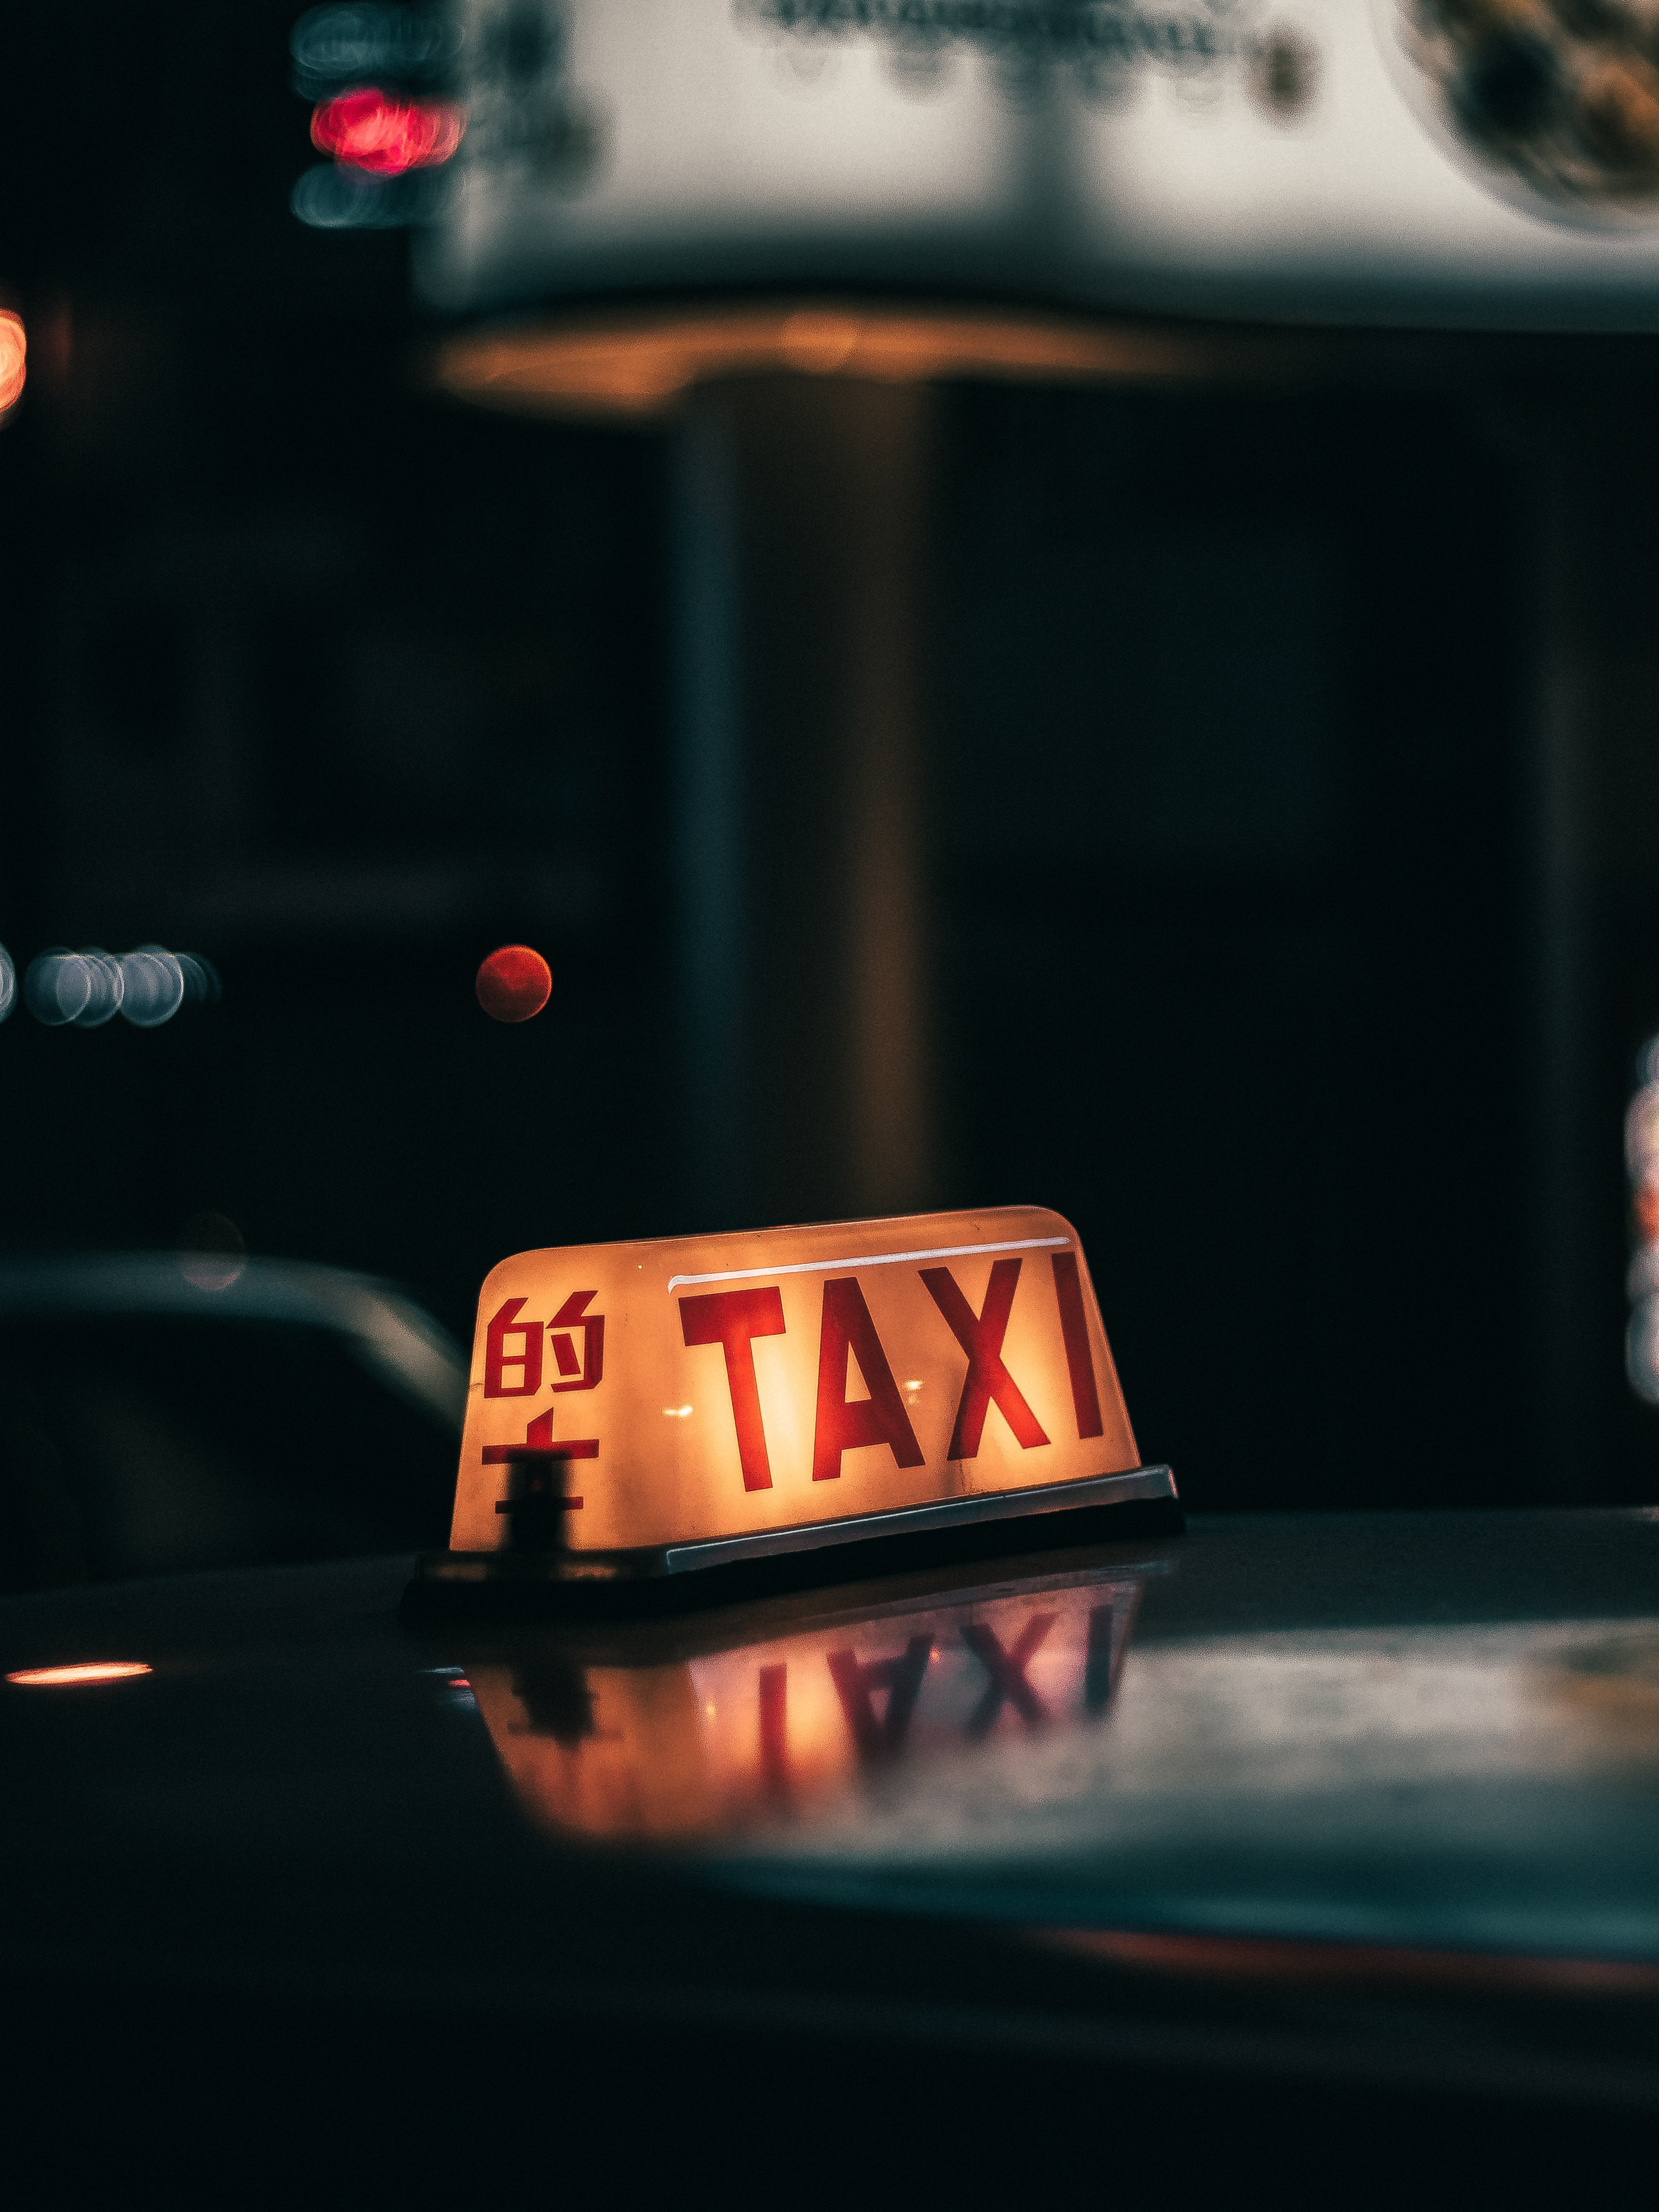 Cab Pictures [HD] | Download Free Images on Unsplash